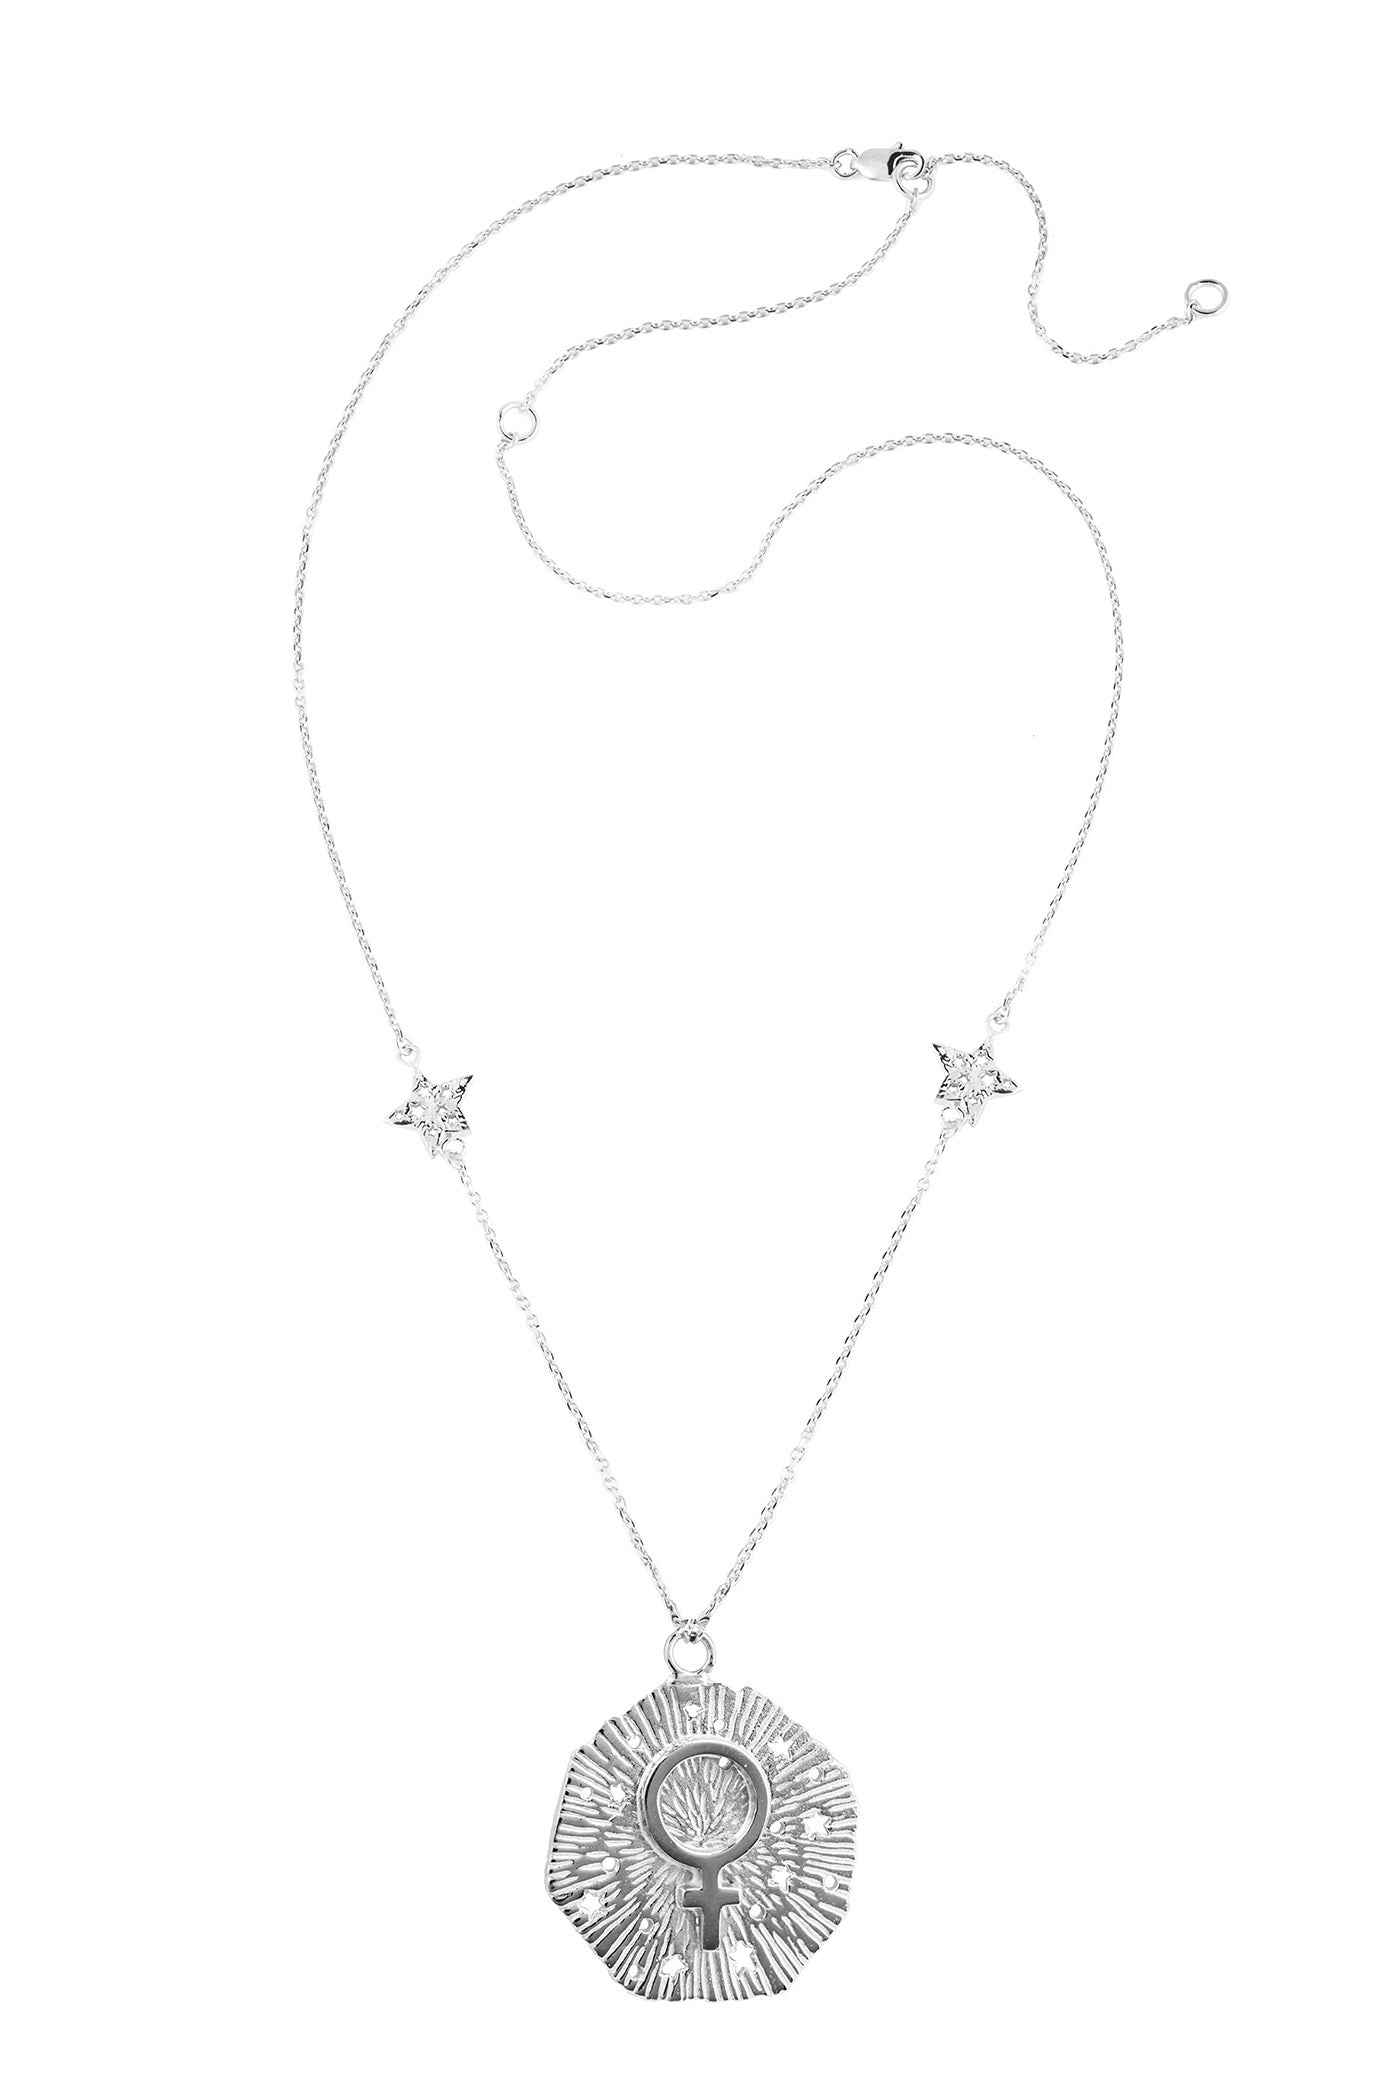 Venus with 2 stars on the chain necklace. 57 cm. Silver